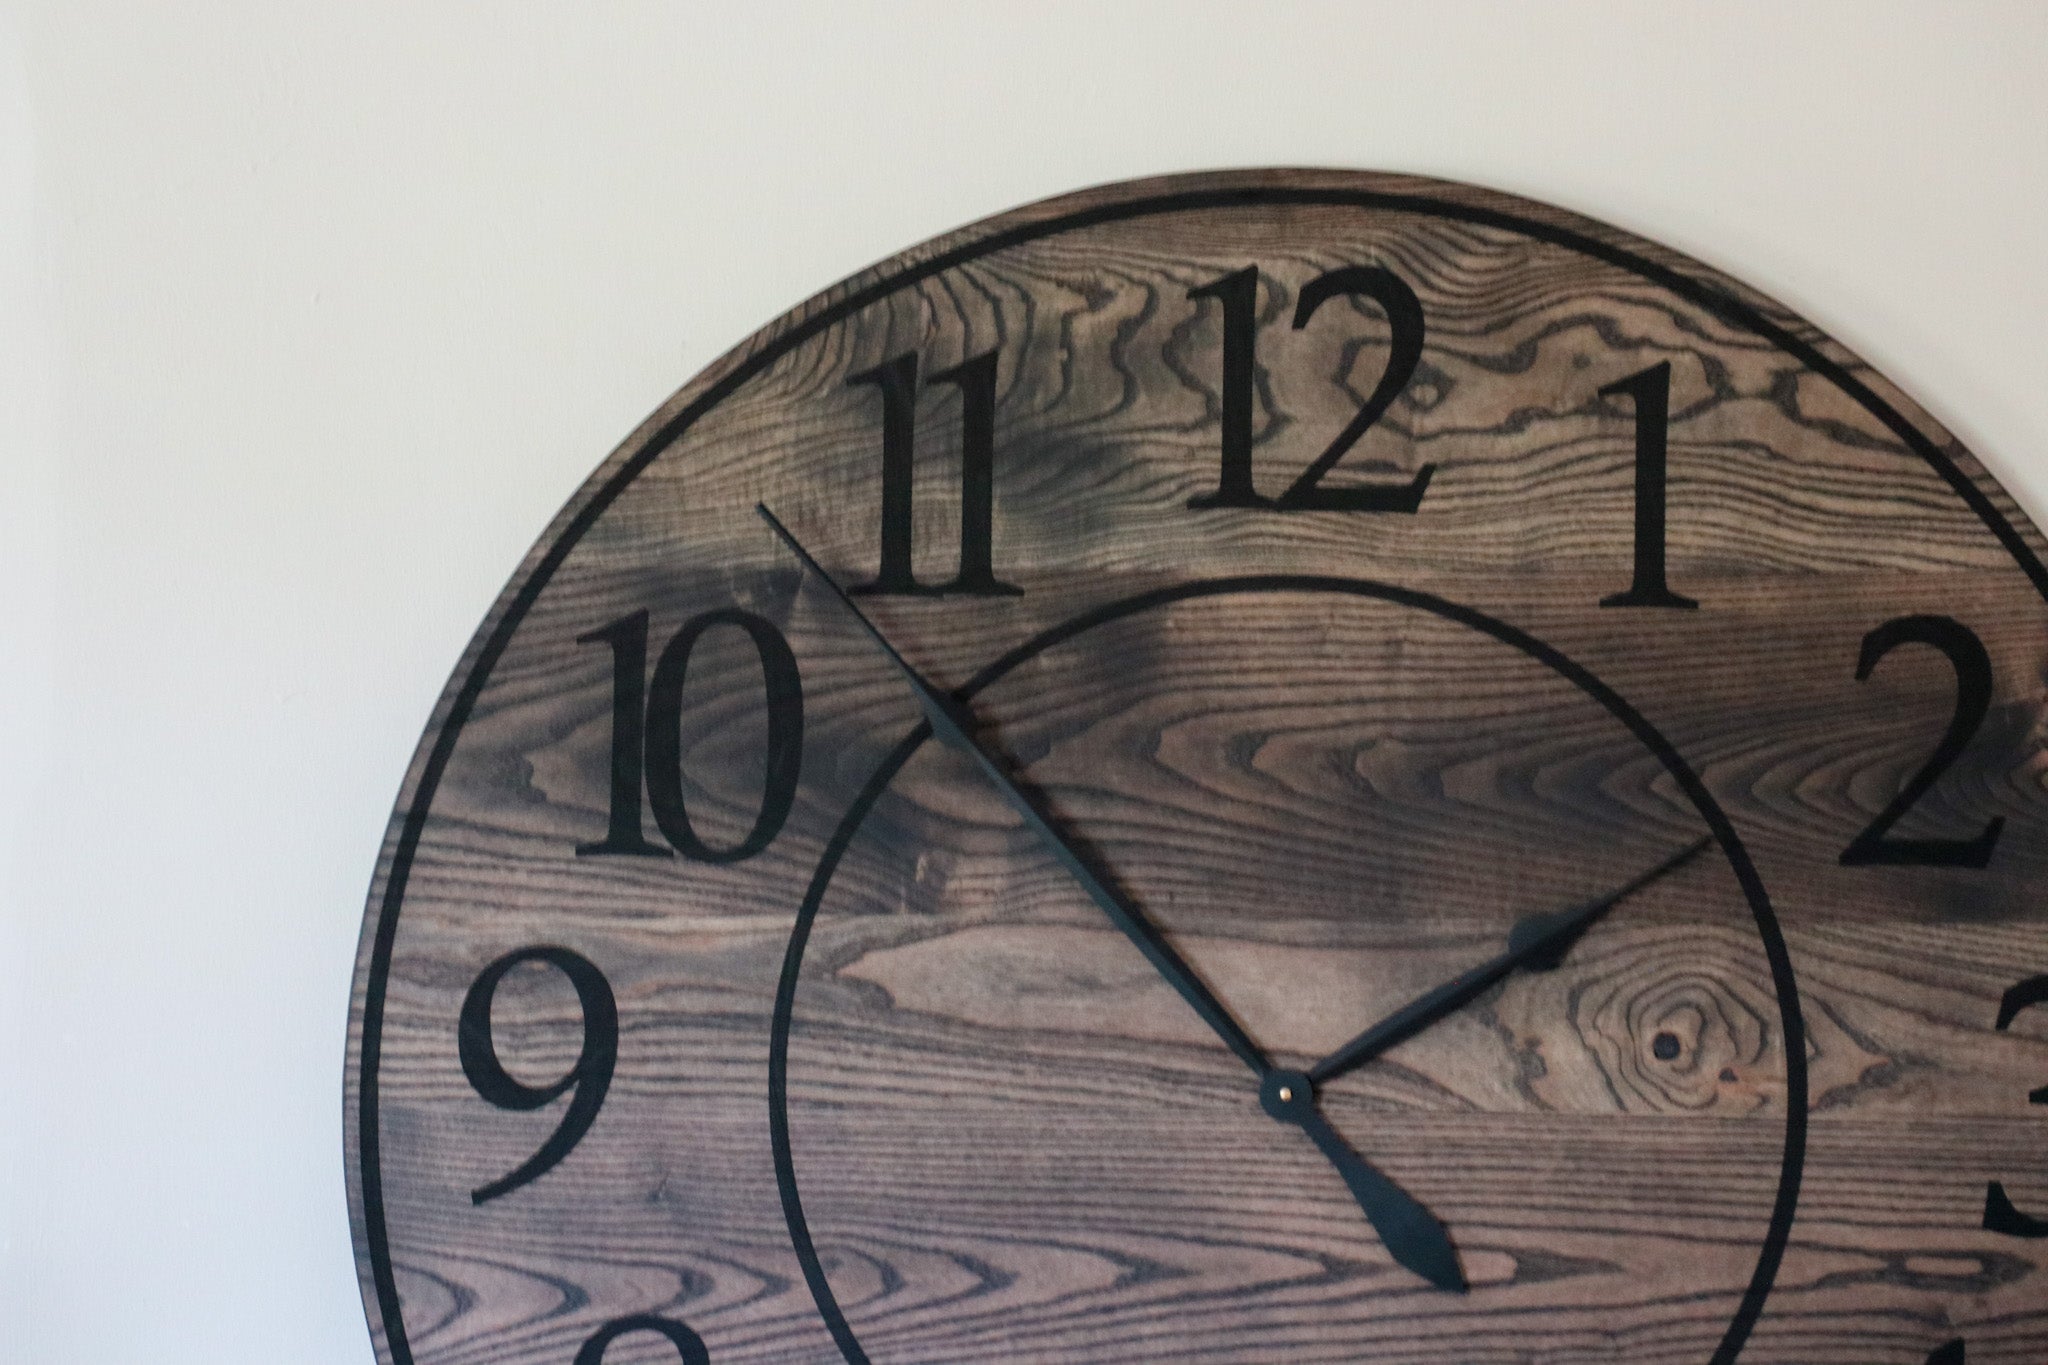 Black Stained Solid Ash Wood Wall Clock with White Roman Numerals - Hazel Oak Farms